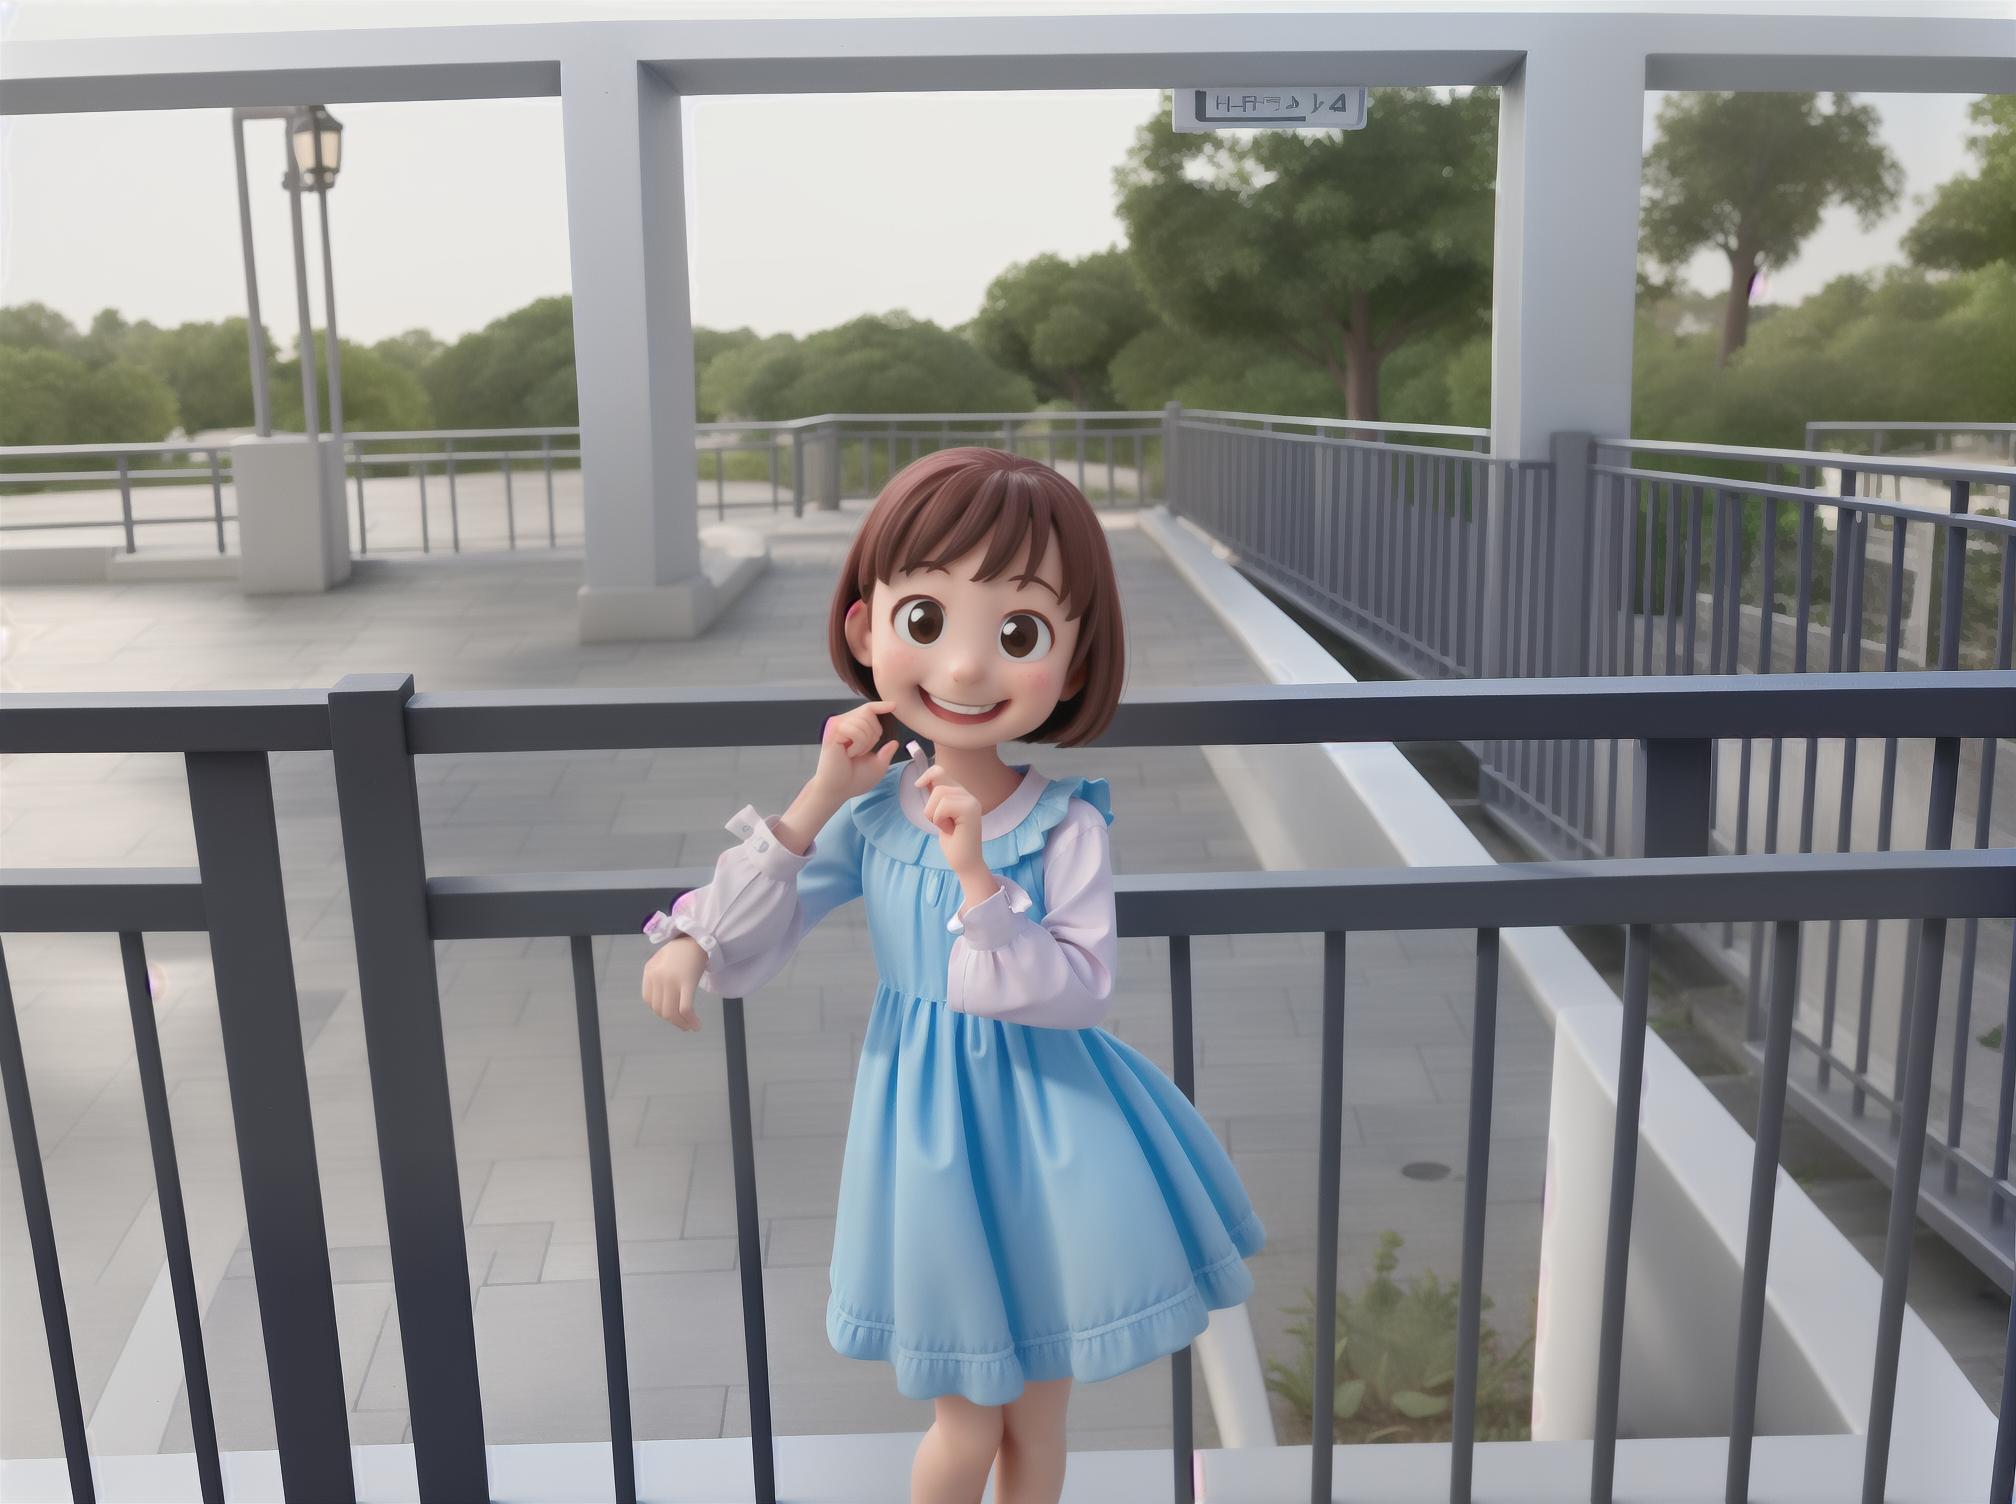  masterpiece, best quality, little girl, blue dress, railing front, bier, smile, masterpiece, top quality, best quality, 8k resolution